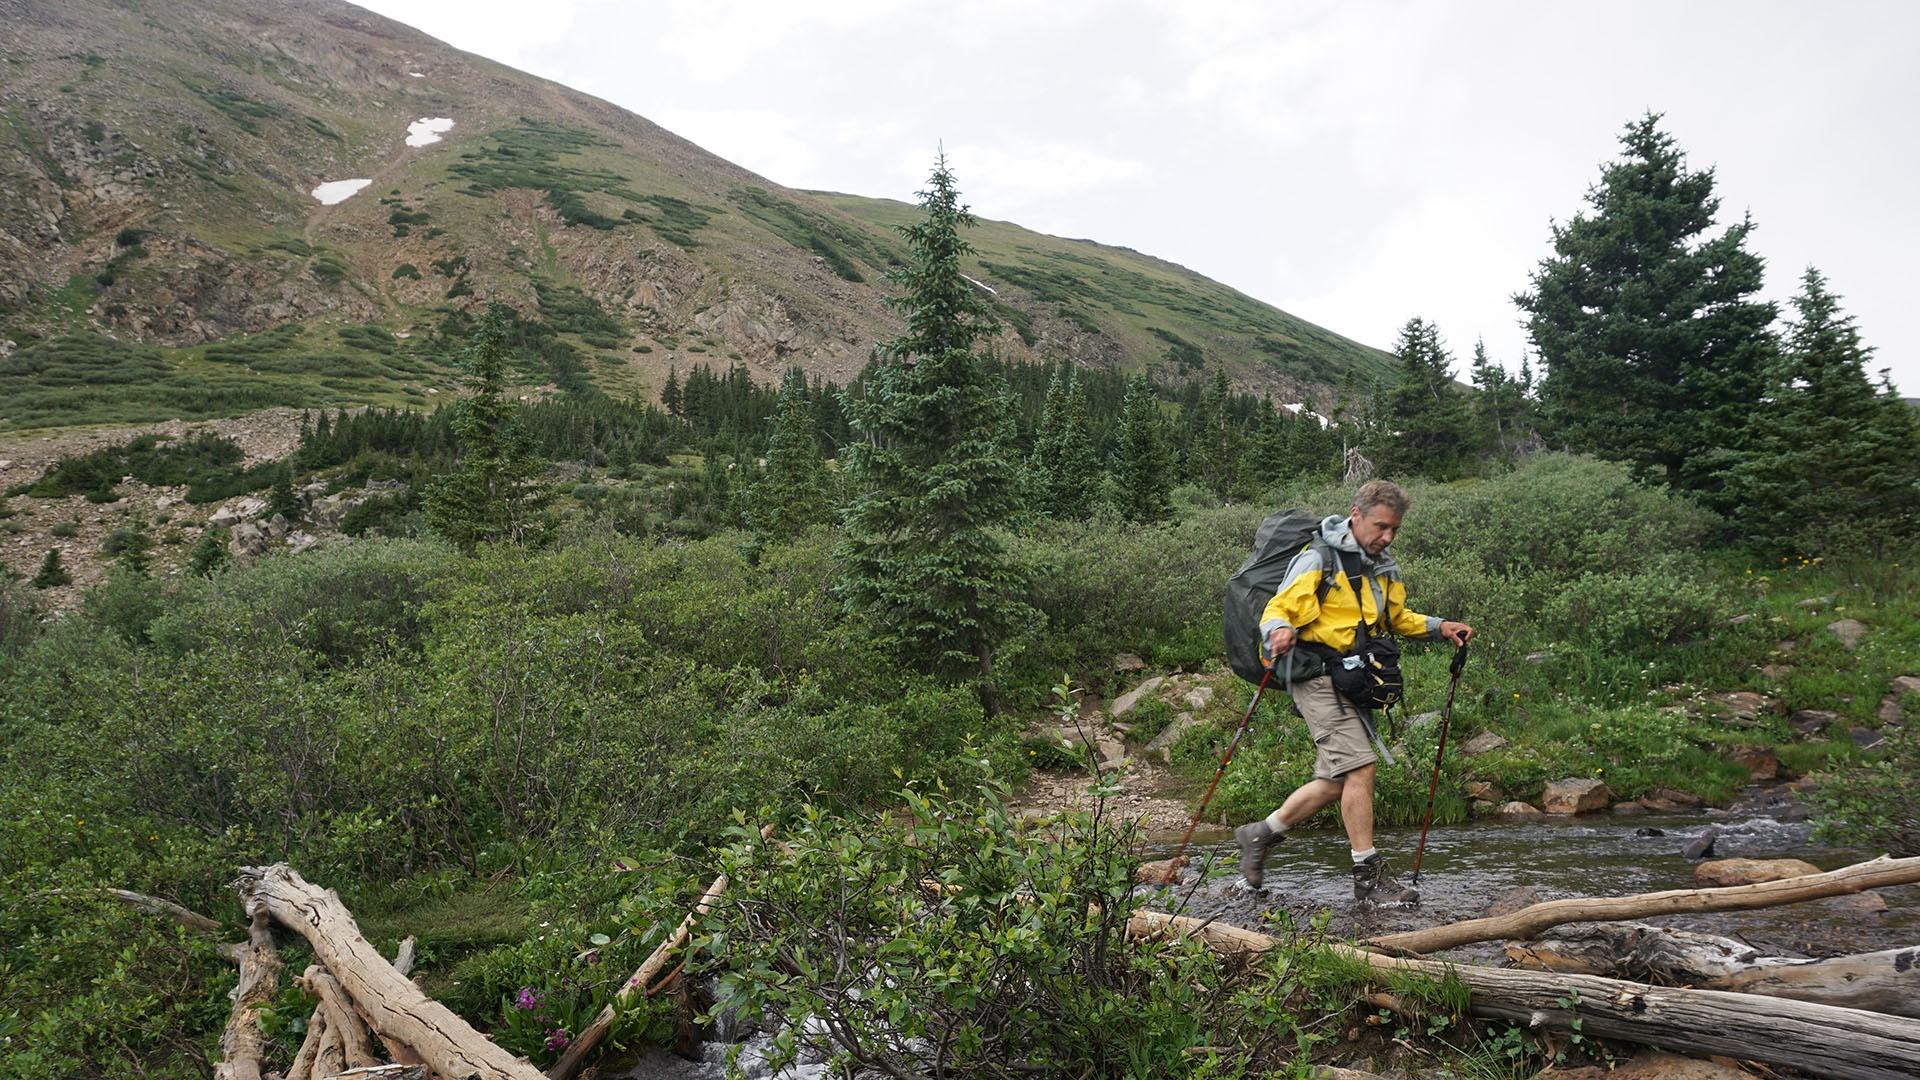 Mike Forsberg crosses a stream while hiking to follow the water.